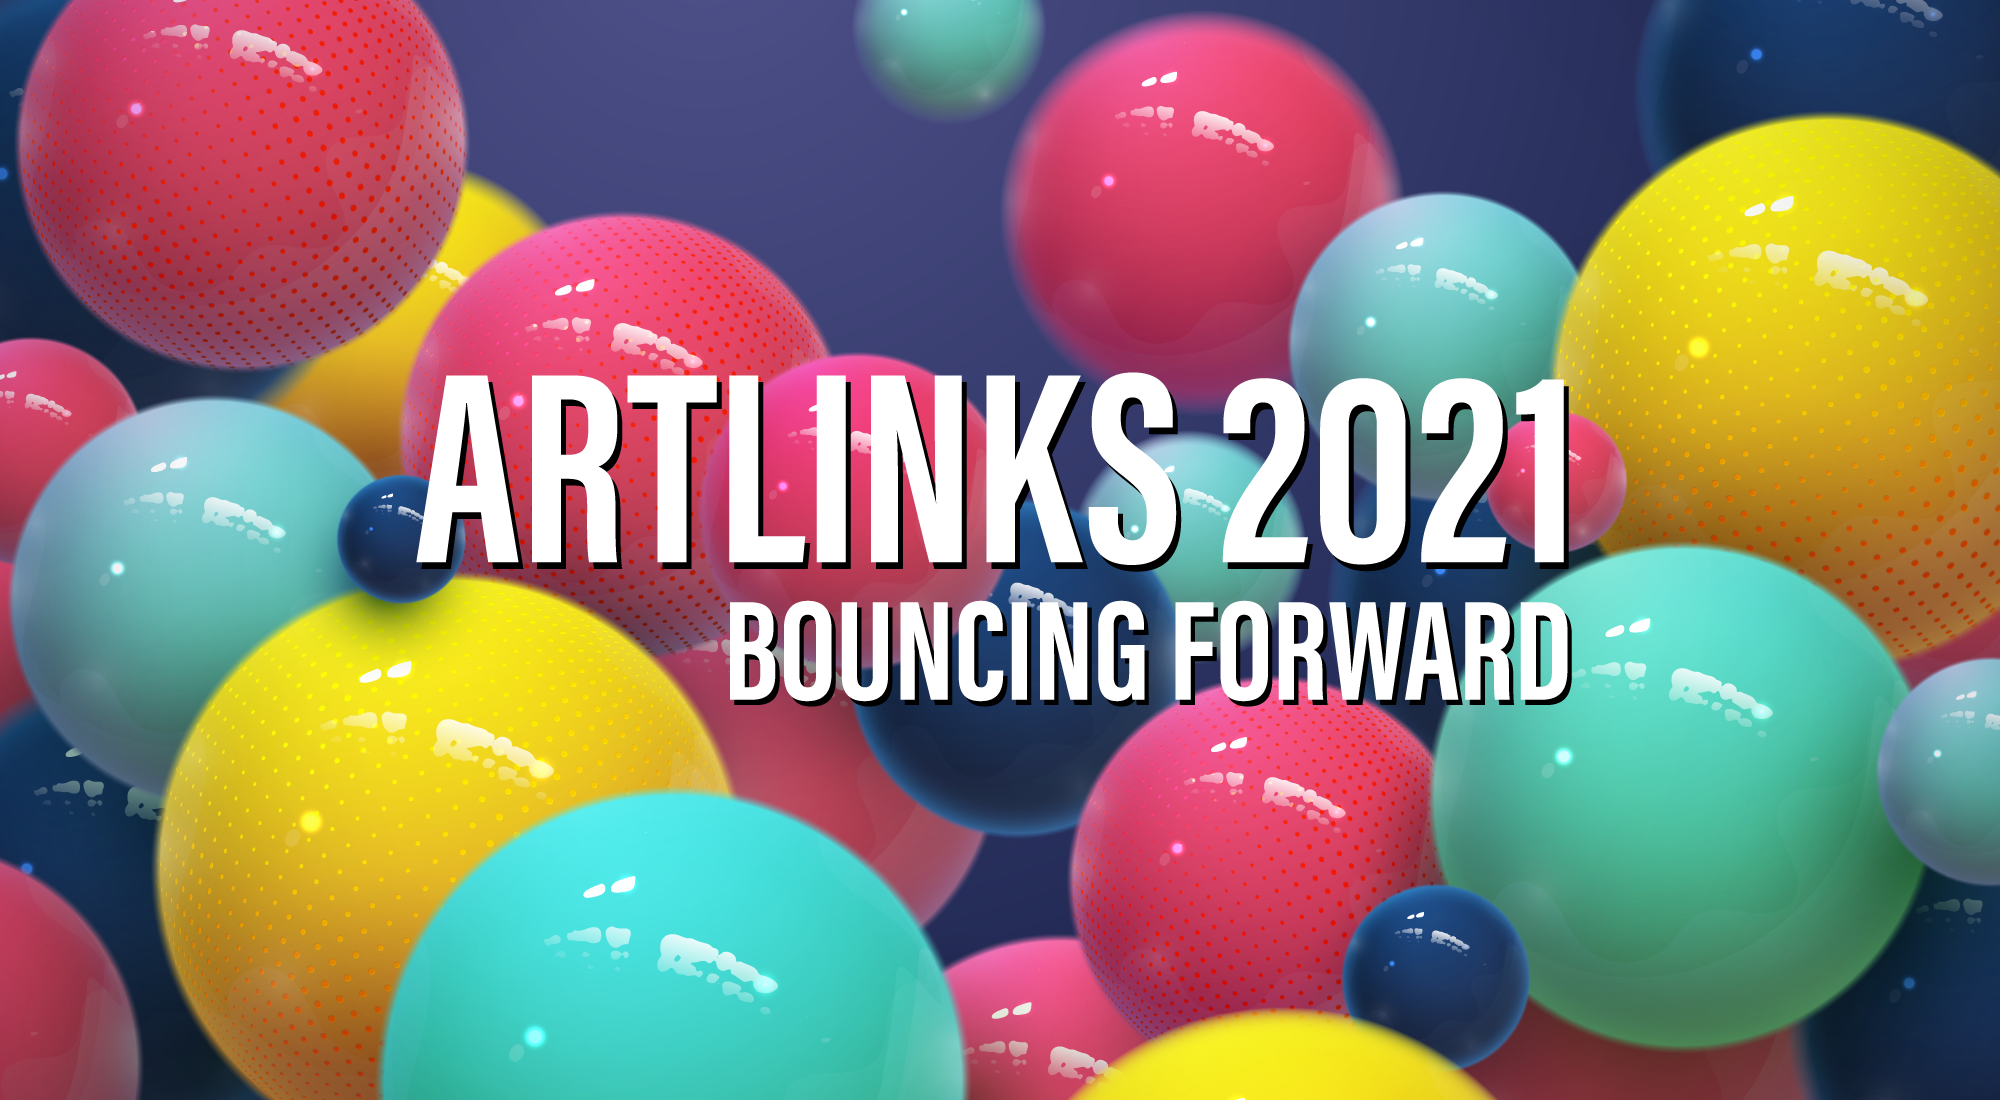 Bouncing Foward Conference 2021